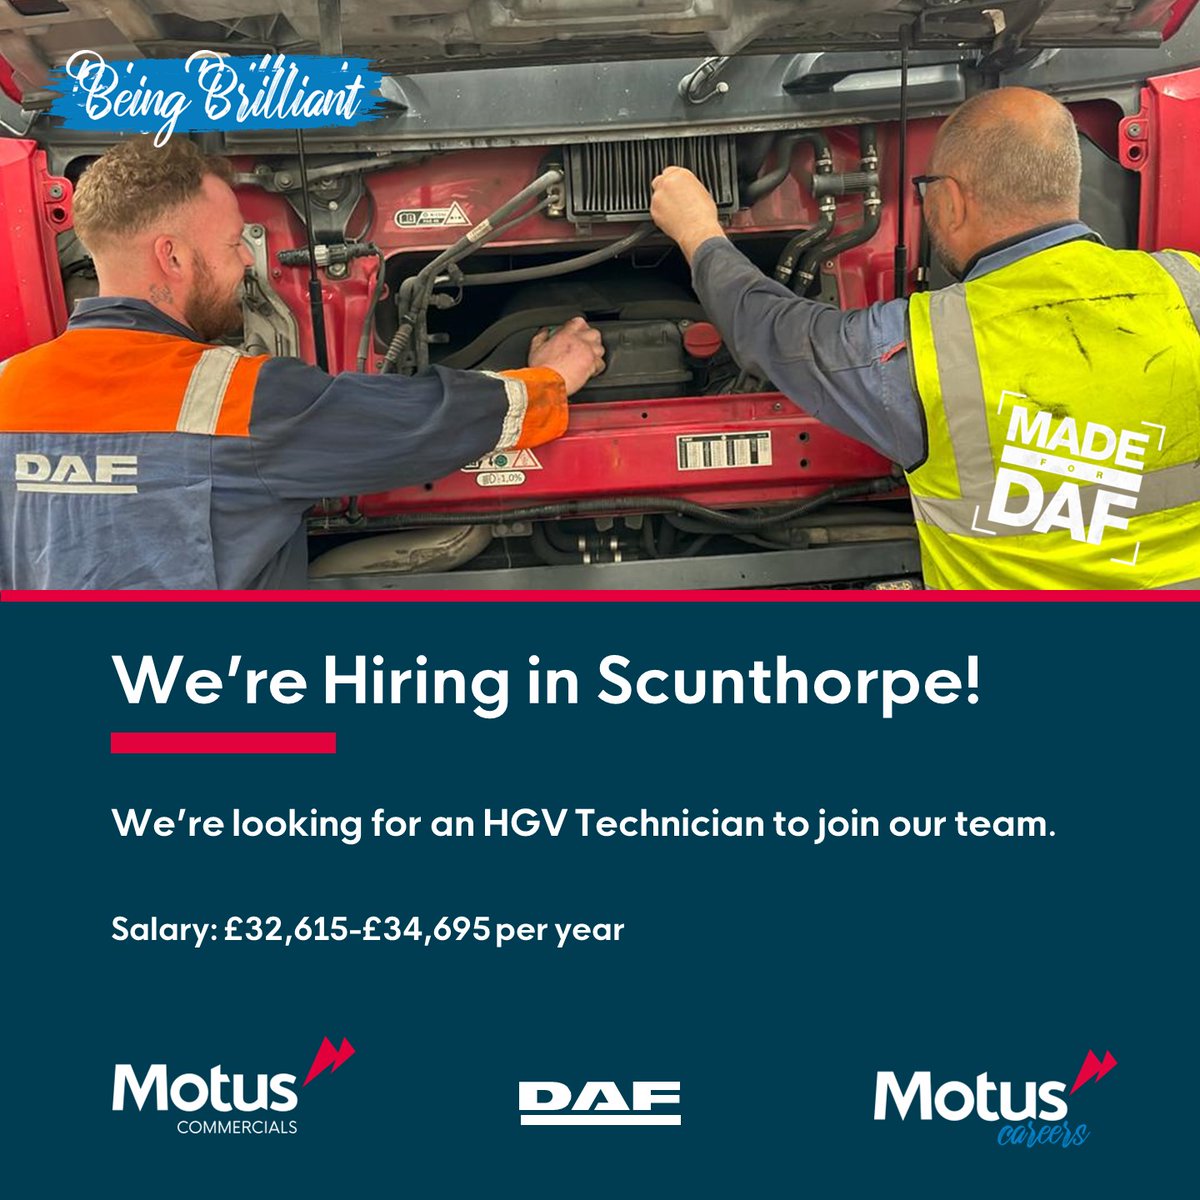 ⭐We're looking for an HGV Technician in Scunthorpe!⭐ To apply, text MOTUS SCU to 66777 Or email your CV to recruitment@motuscommercials.co.uk Find out more➡️ loom.ly/Dm-IADk #Jobs #JobSearch #Hiring #Vacancy #Careers #HGVTechnician #MotusPeople #MotusCommercials